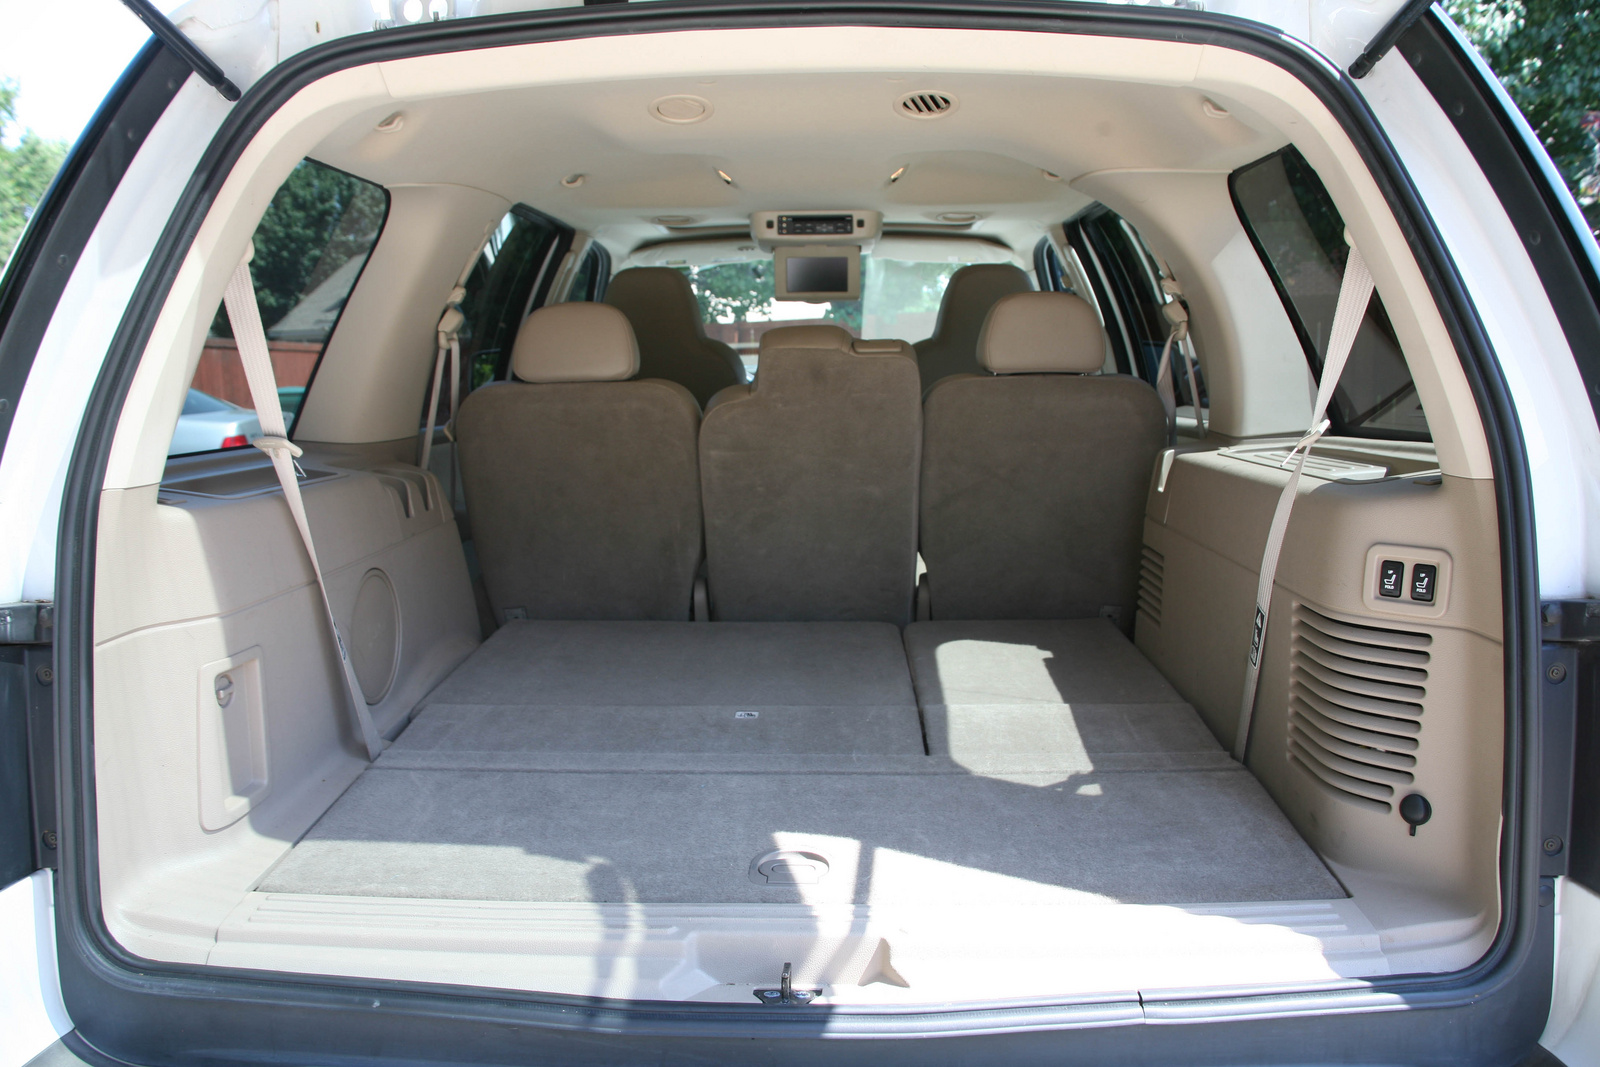 2003 Ford expedition interior dimensions #9